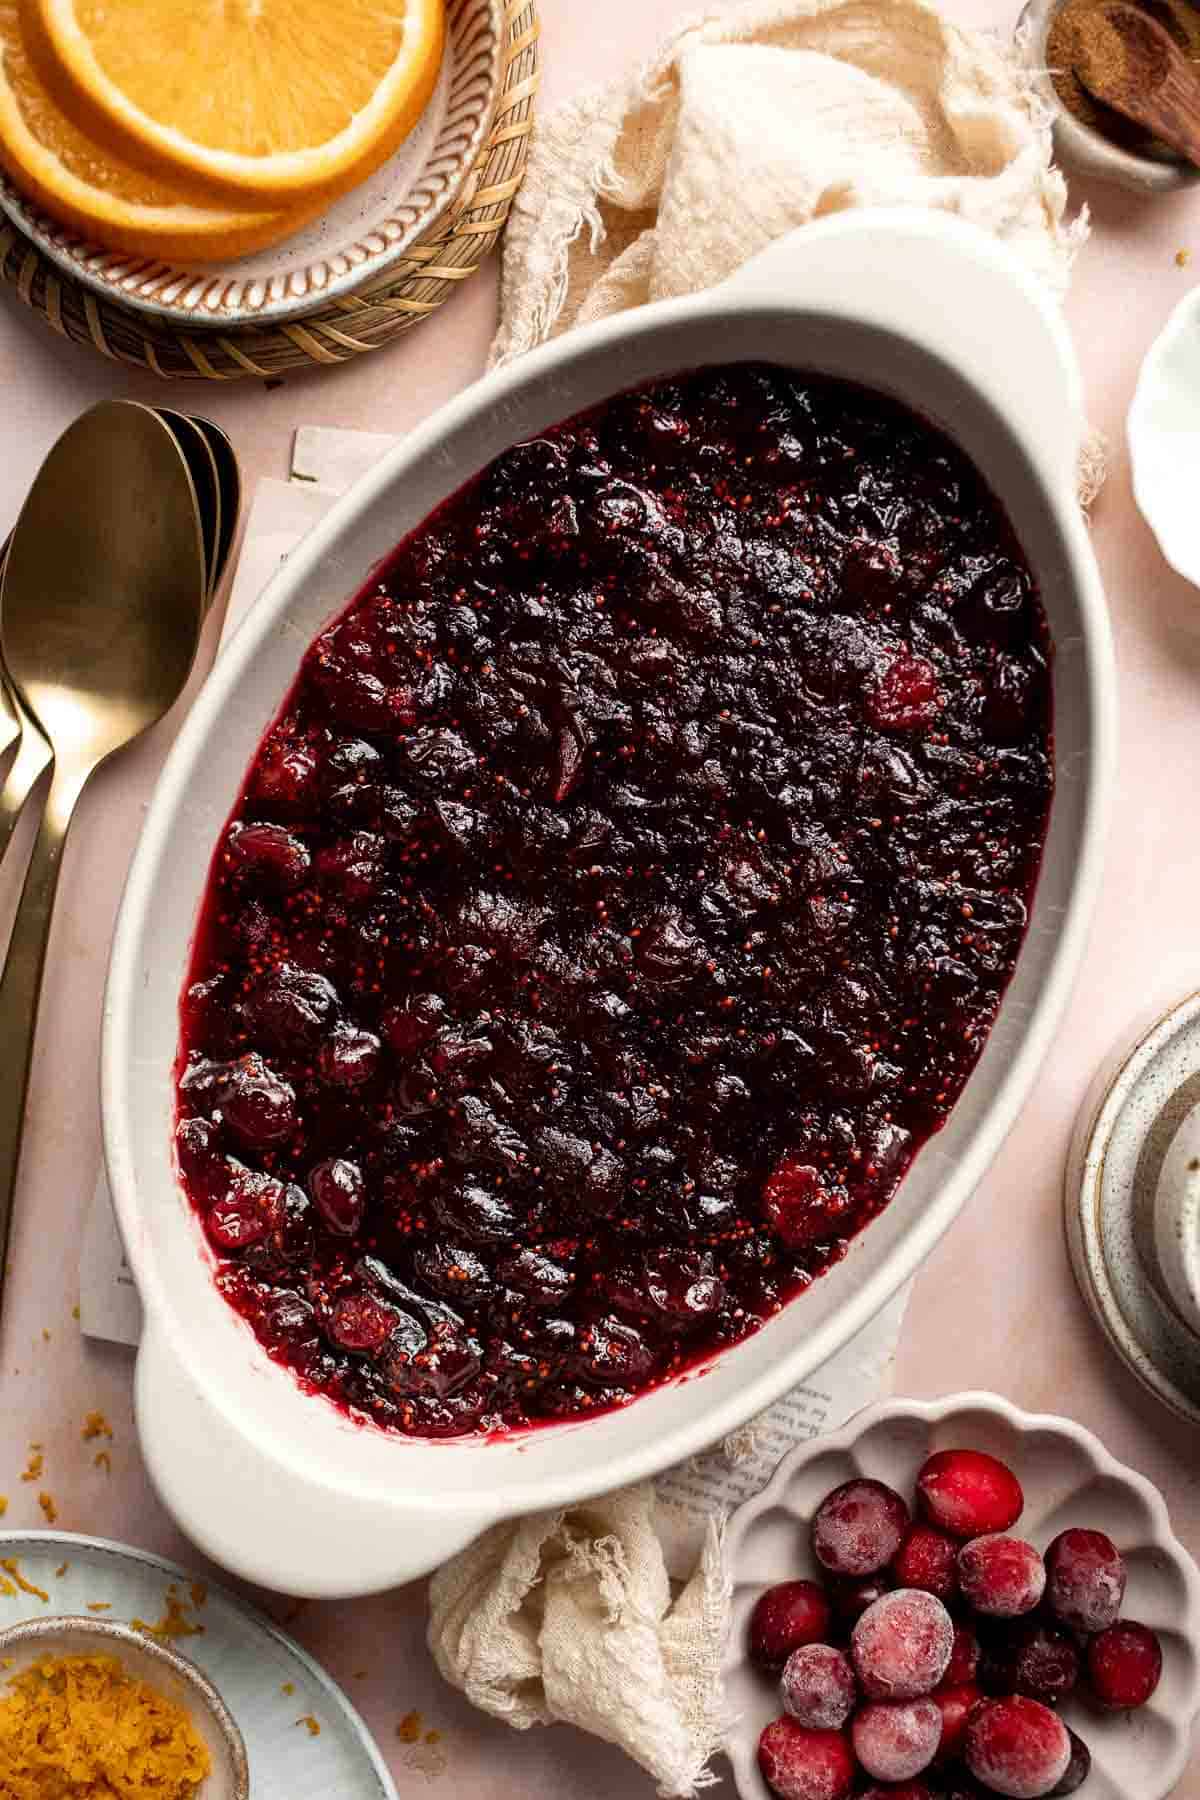 This Baked Cranberry Sauce recipe is an easy way to make a classic Thanksgiving side dish in the oven using 4 ingredients. It is thick, tart, and sweet. | aheadofthyme.com